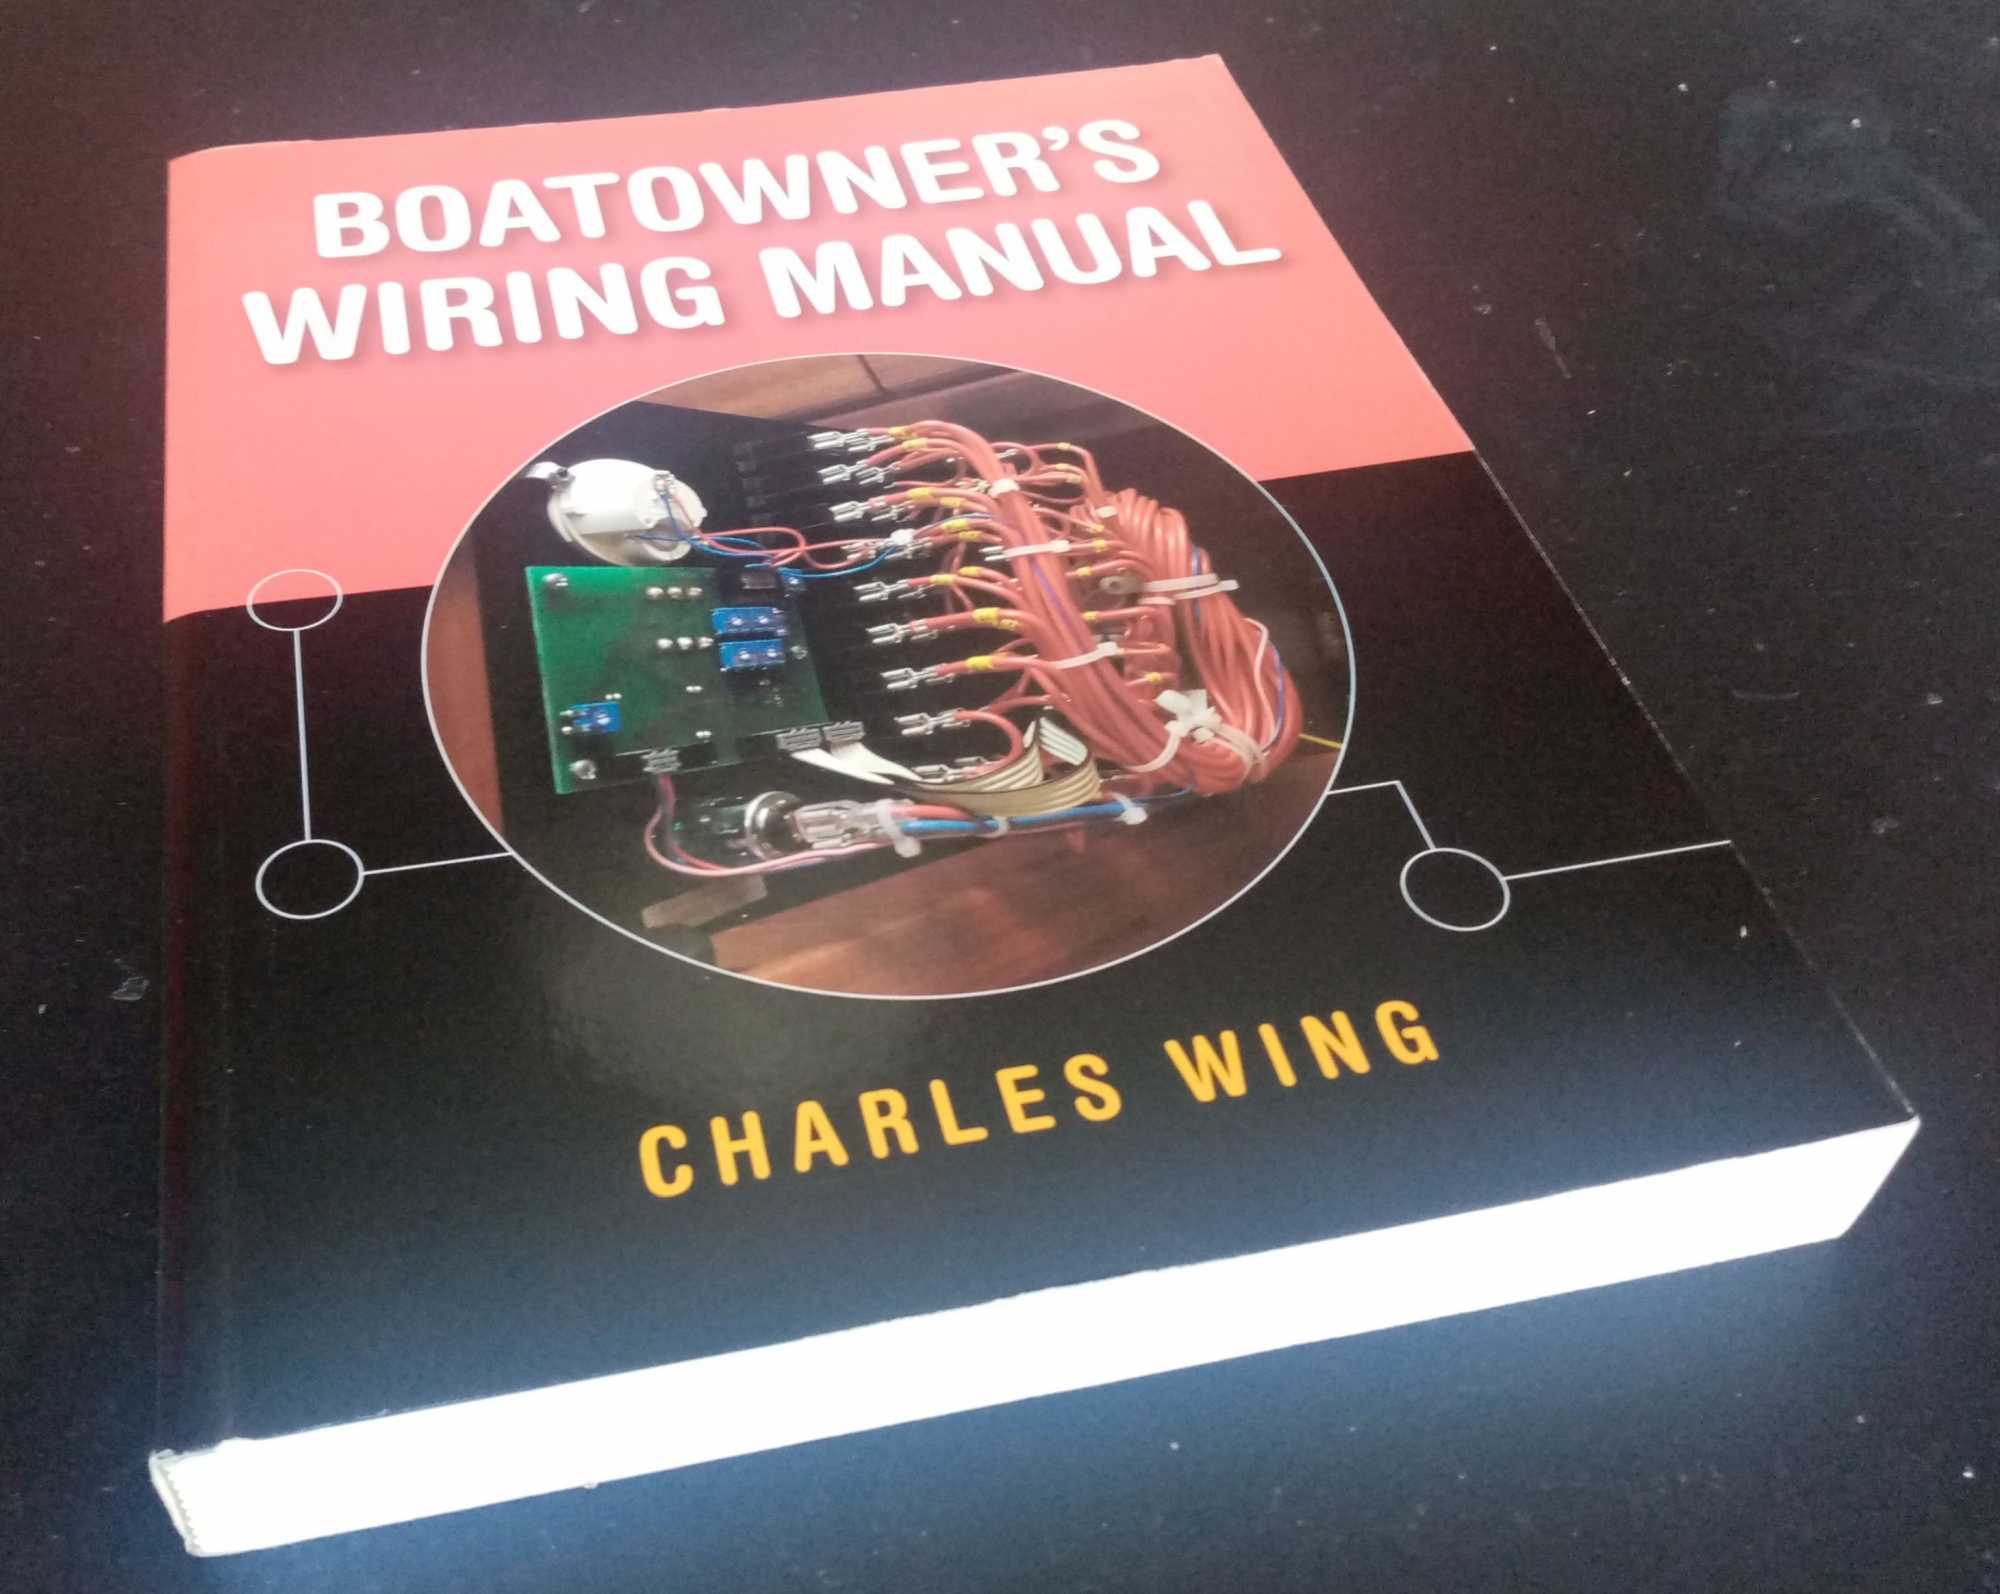 Charles Wing - BOATOWNER'S WIRING MANUAL    2004 edition.